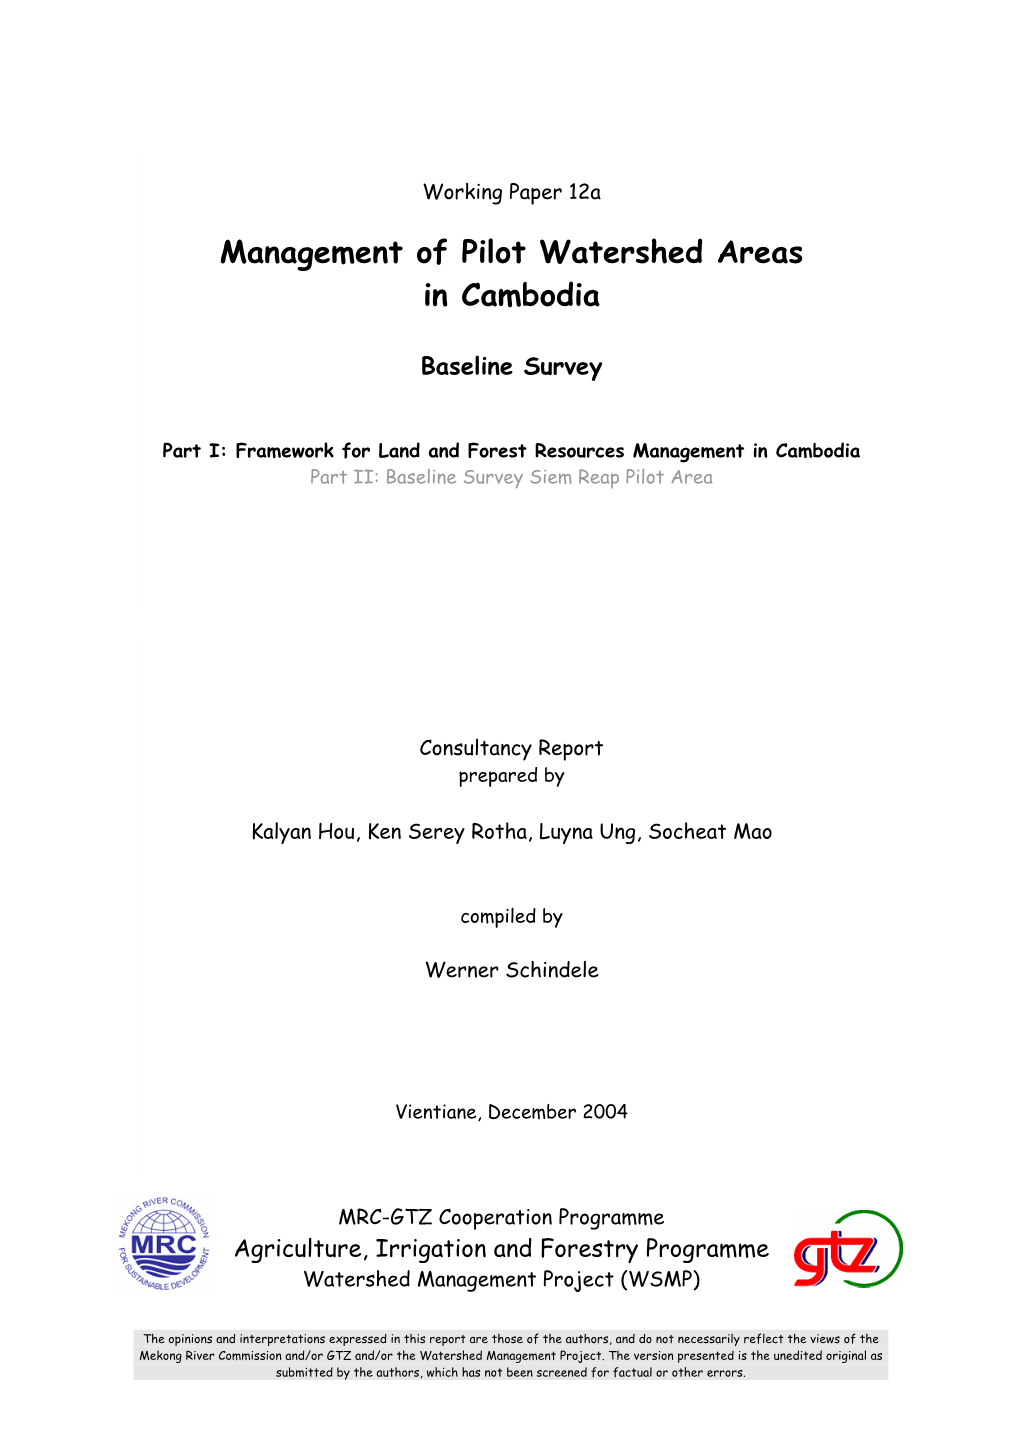 Management of Pilot Watershed Areas in Cambodia